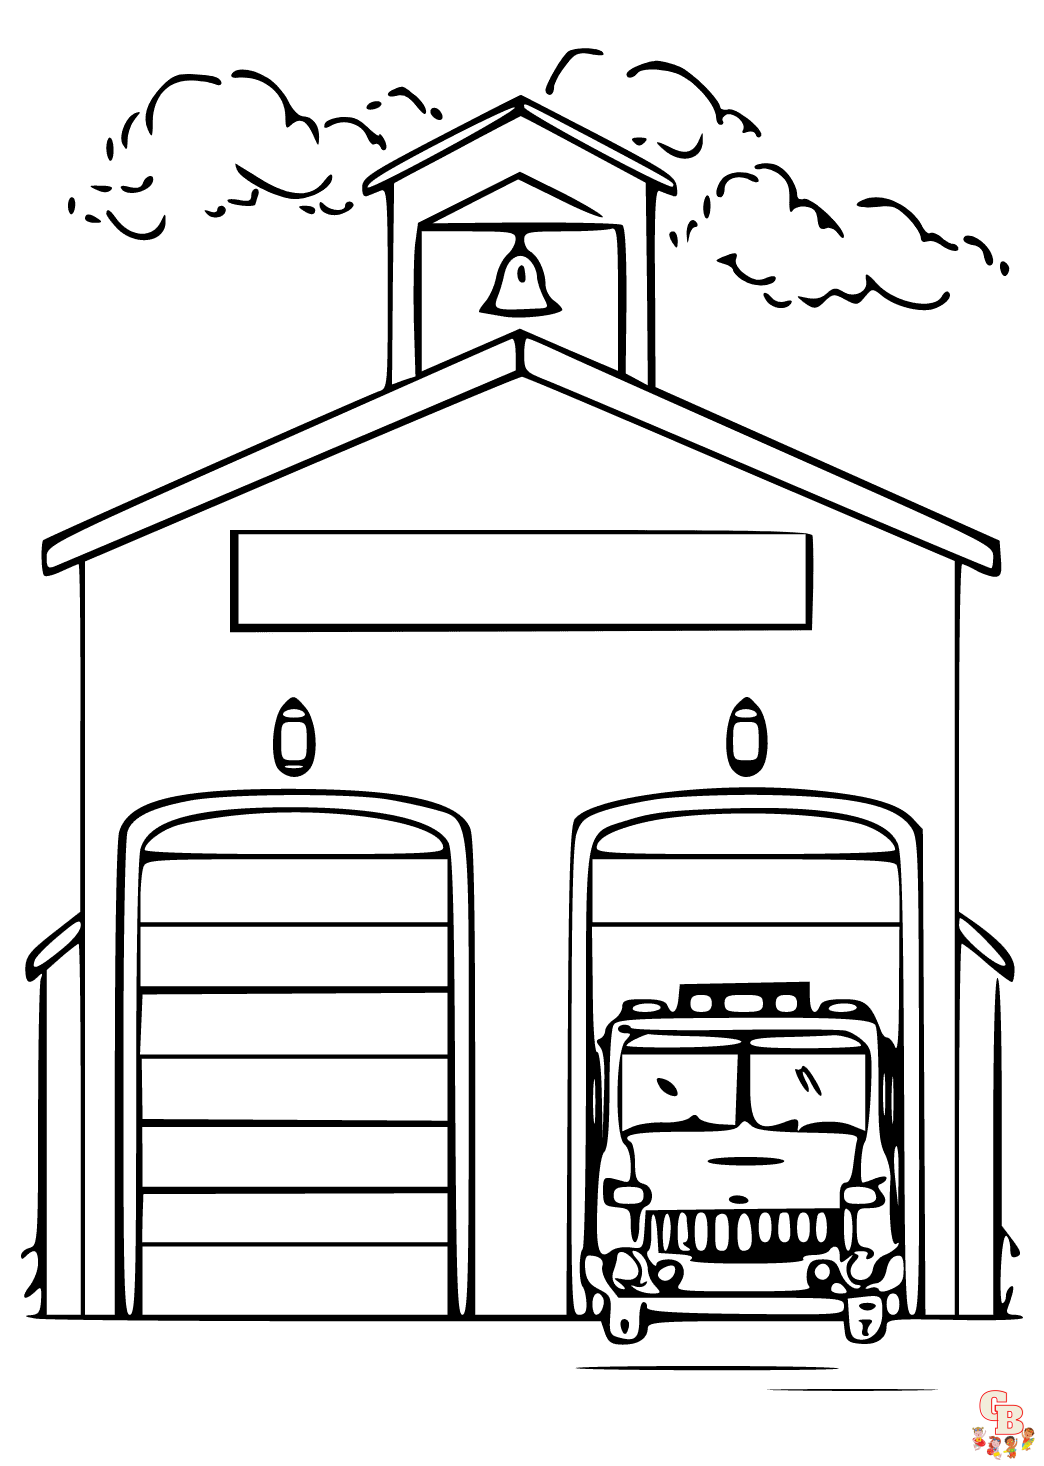 https://gbcoloring.com/wp-content/uploads/2023/10/Printable-Fire-station-coloring-sheets.png